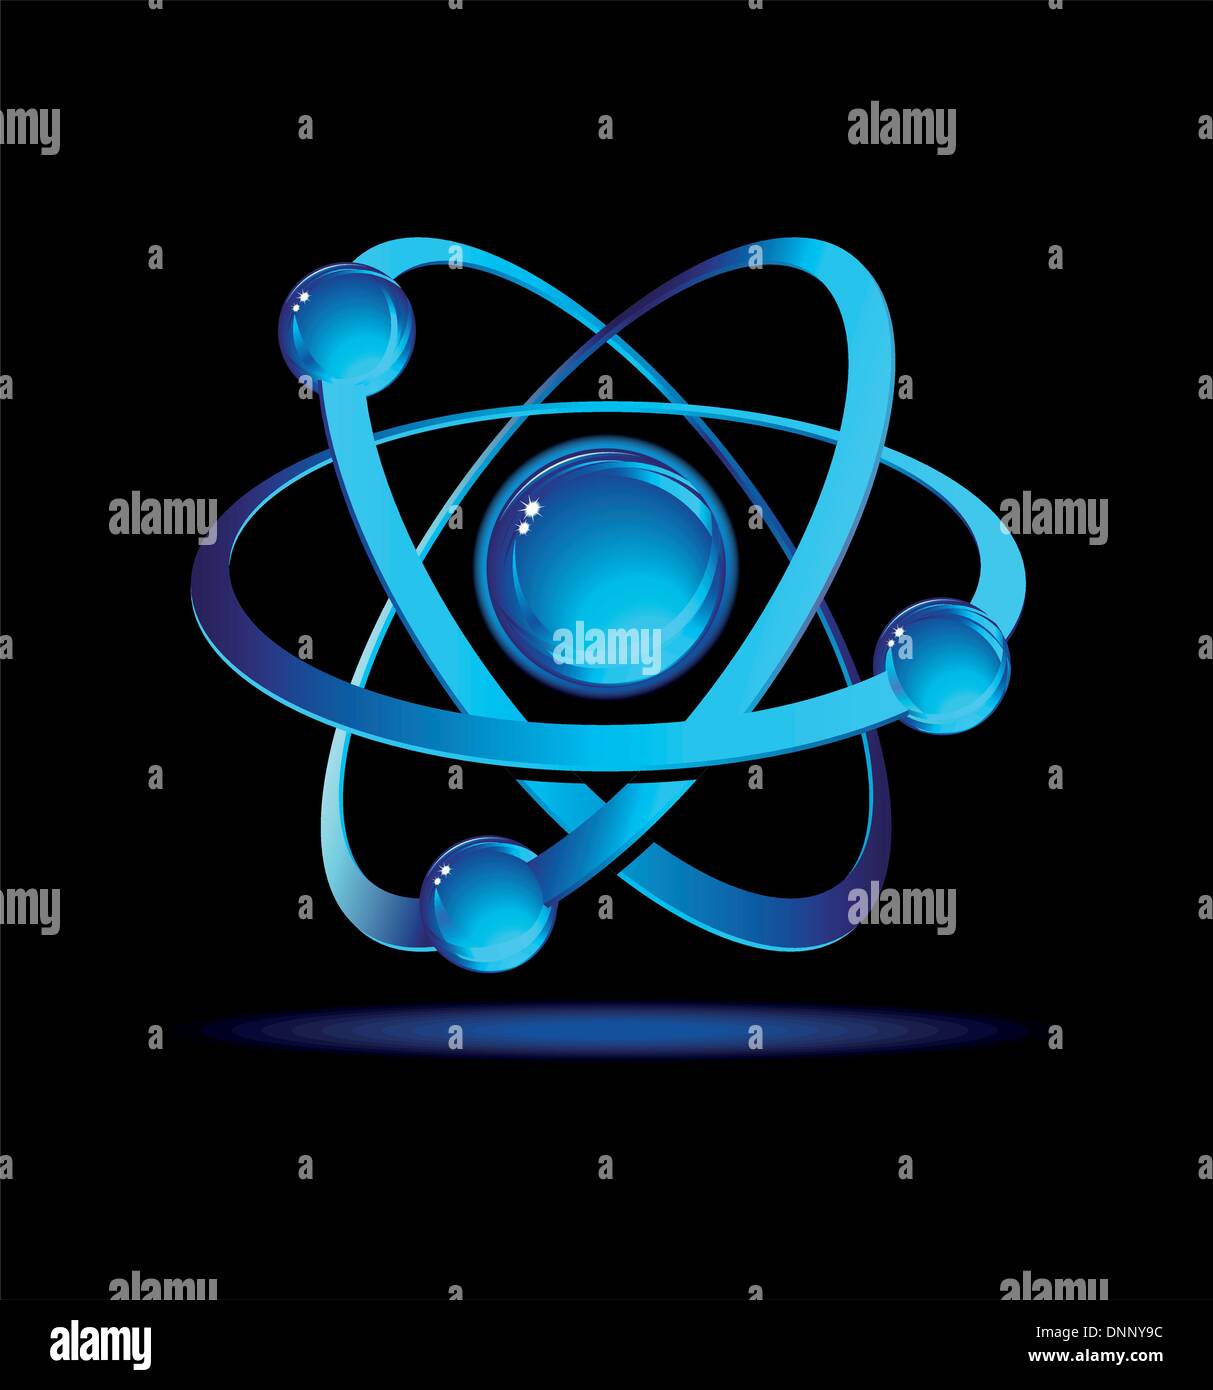 ATOM - Dramatic depiction of atom on a black background with fluorescent shadow Stock Vector